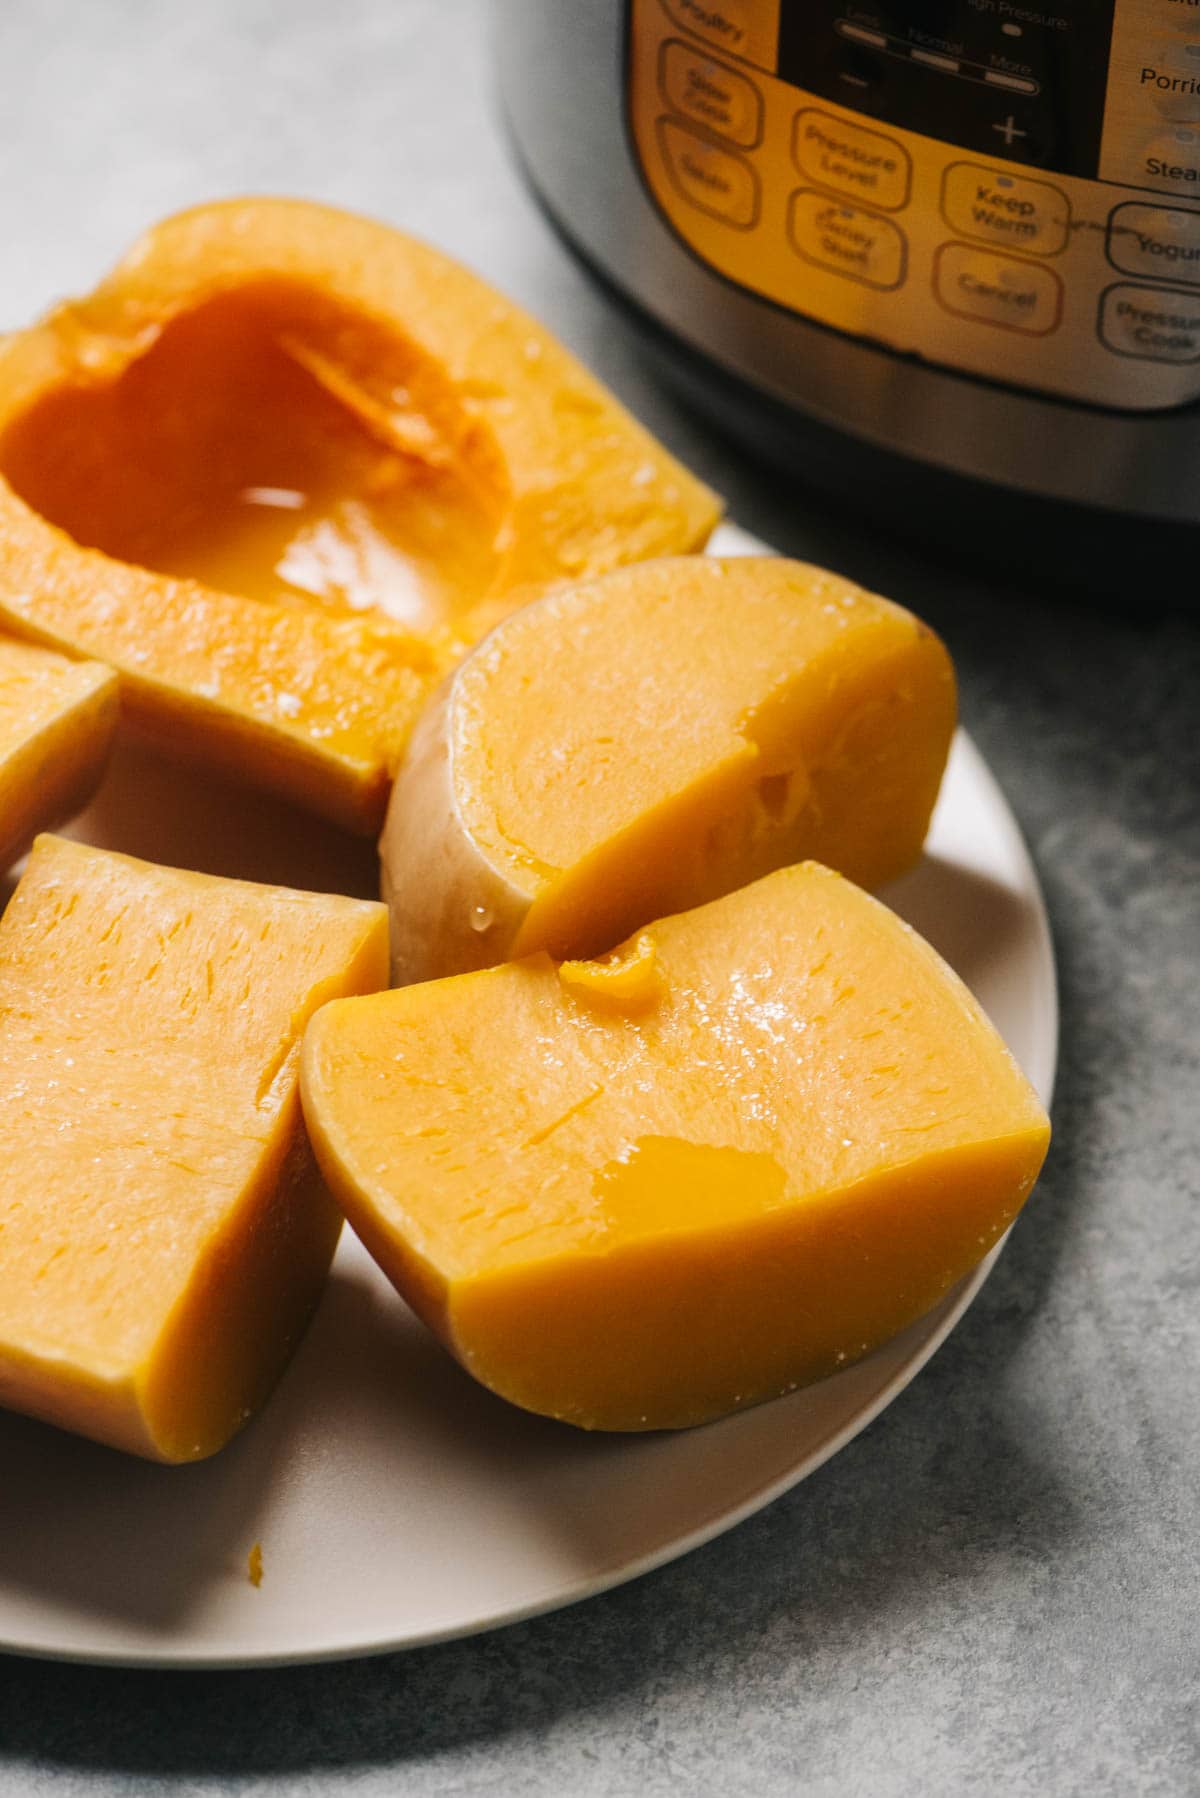 Steamed butternut squash halves on a plate in front of an instant pot.